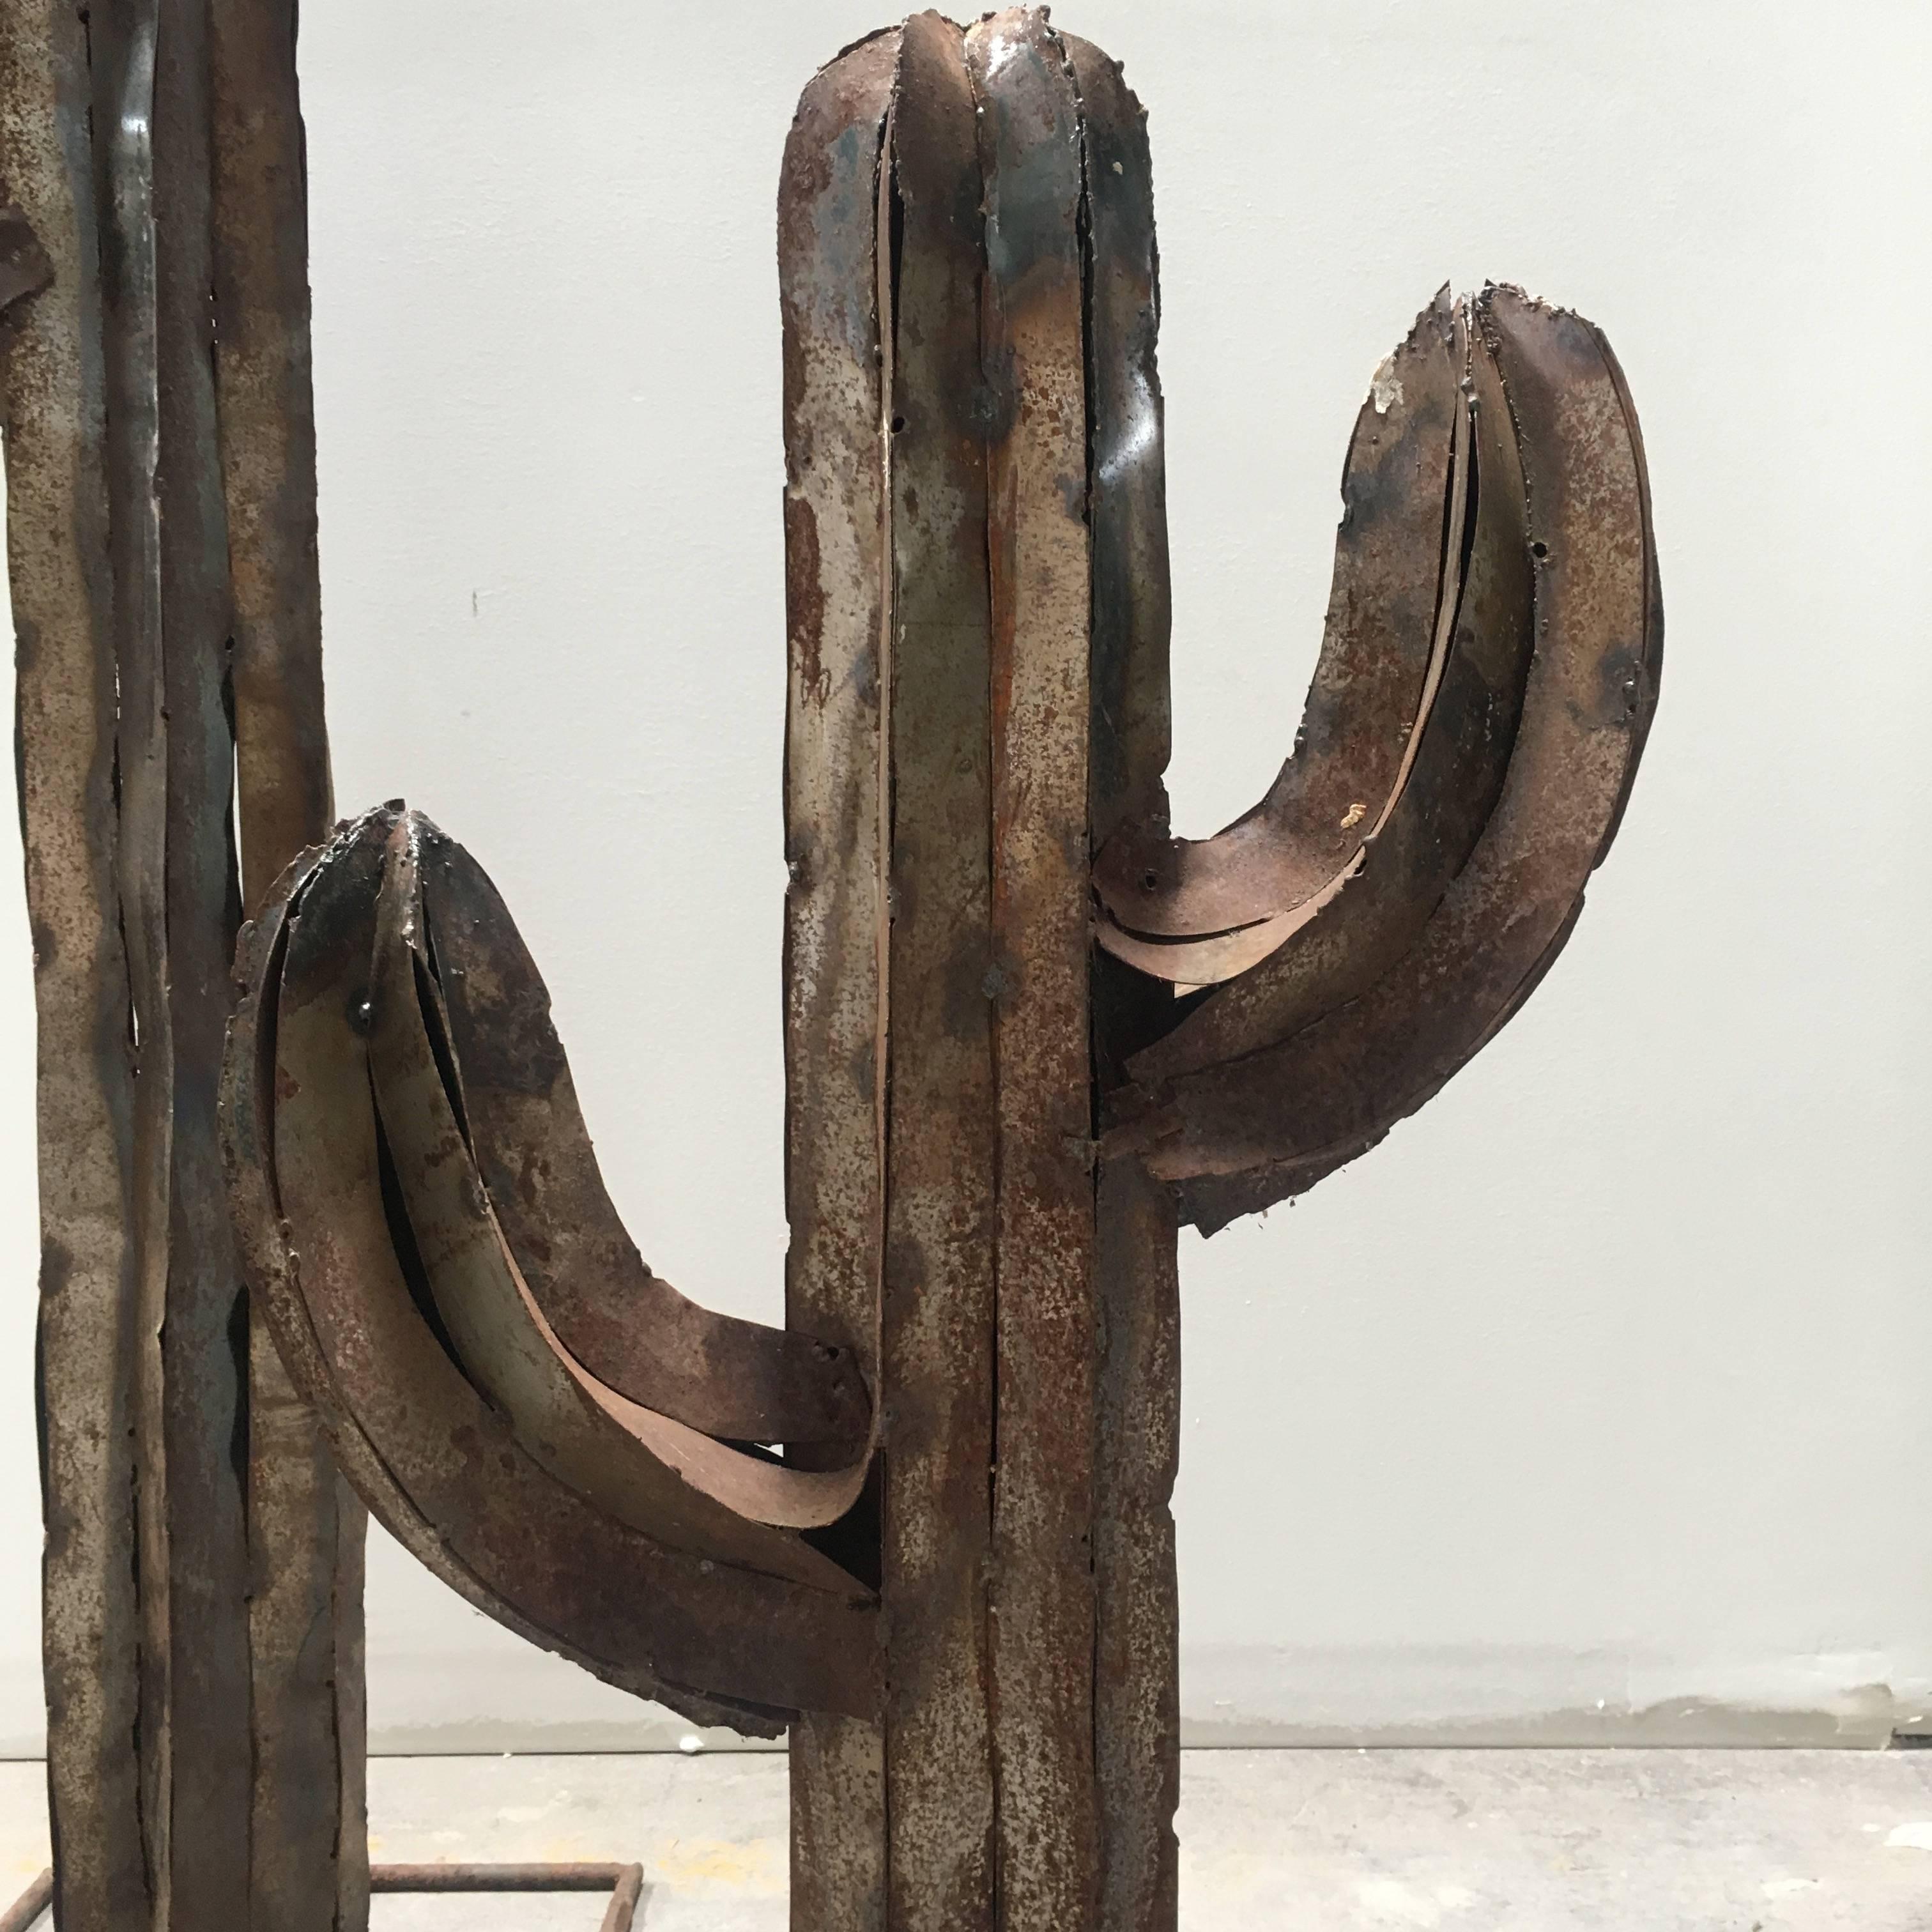 Vintage cactus sculpture, the metal aged, red-ish, and rusted to perfection with loads of Southwest / desert charm. (Larger + Small cactus sculpture unavailable)  

Measure: Medium 57" H x 22" W x 12" D